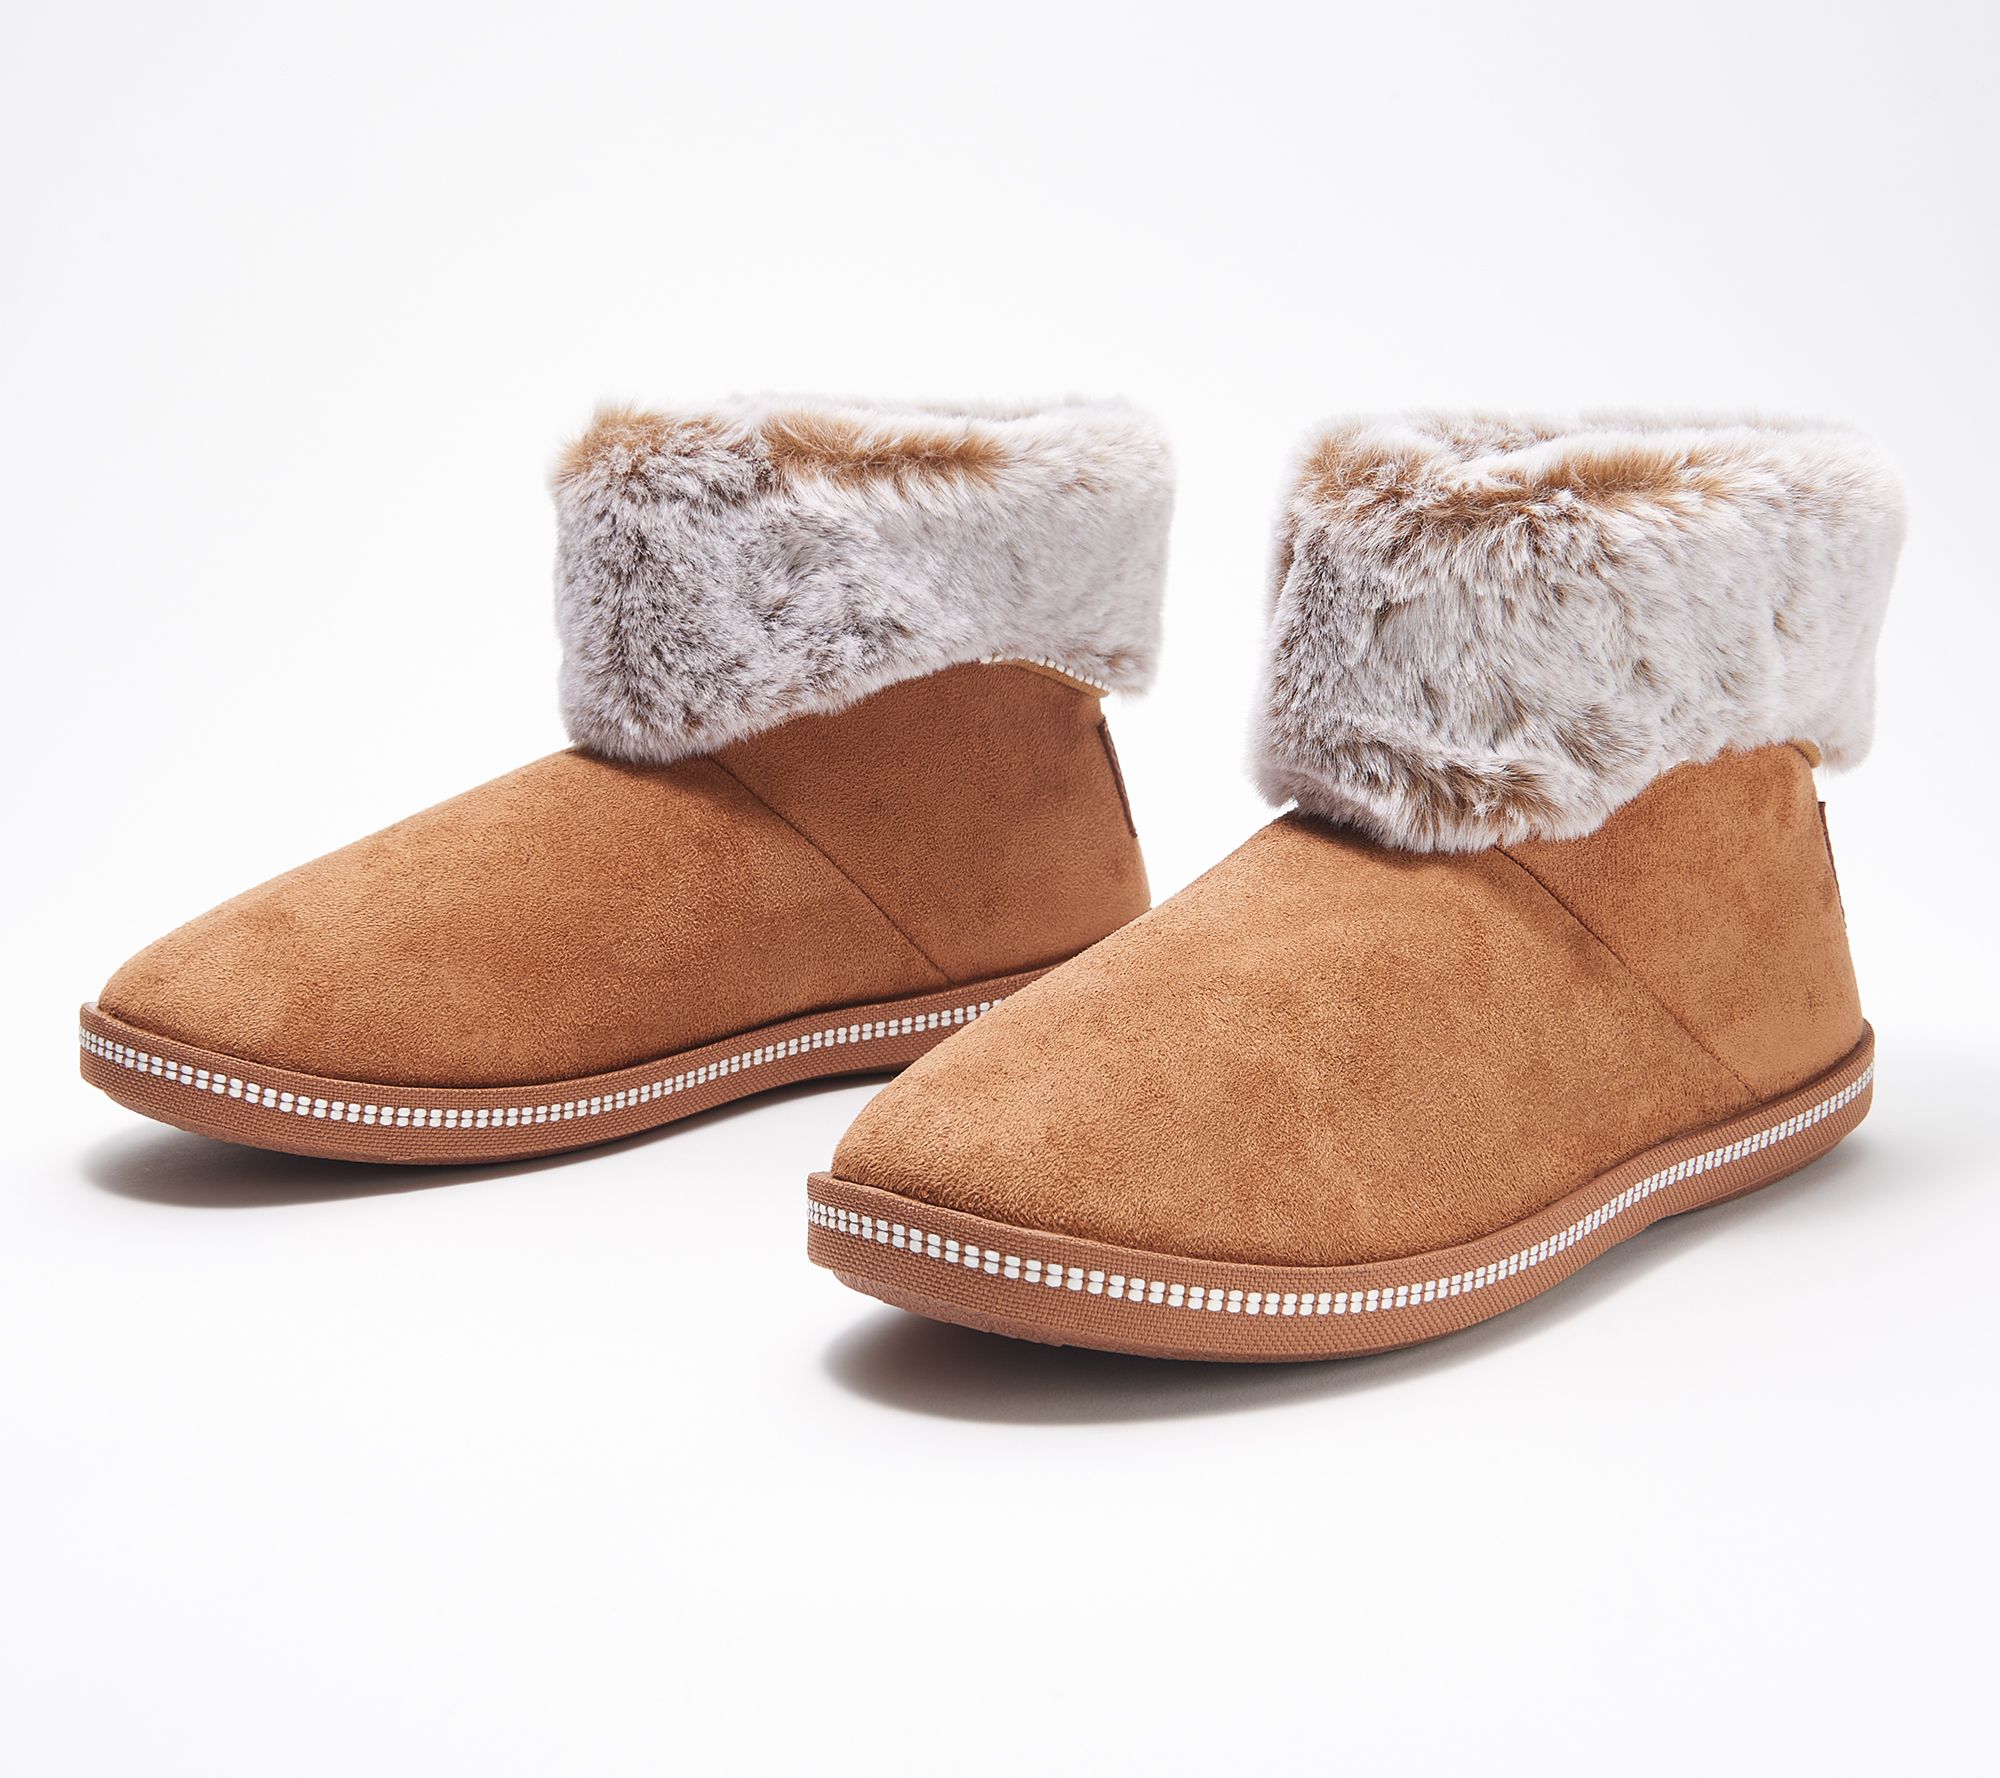 Skechers Cozy Campfire Slipper Boots w/ FauxFur-Meant to Be, Size 5-1/2 Medium, Chestnut